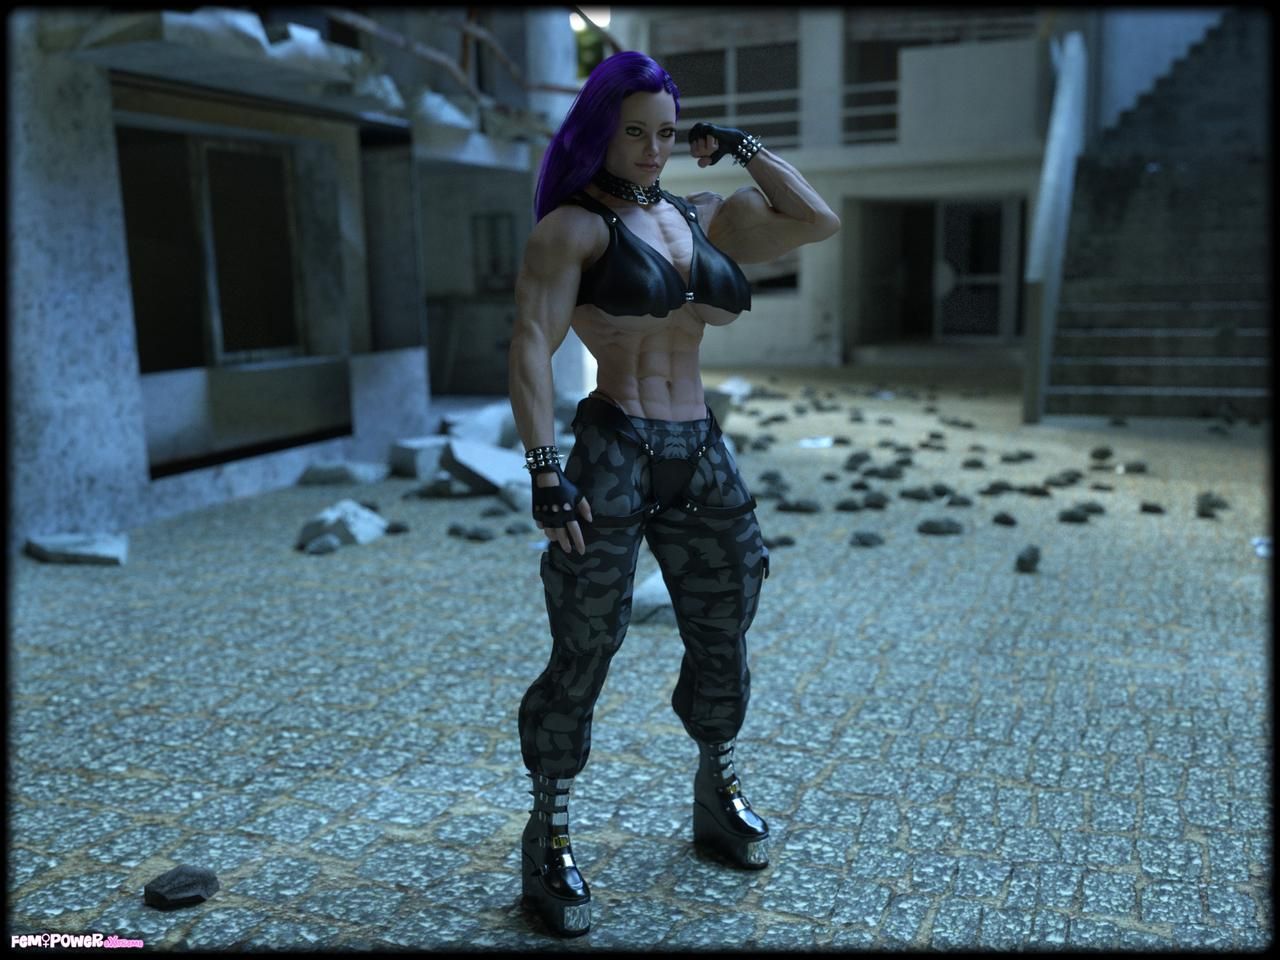 MUSCLE Ciber punk 2077 and futurist concept 3D models by Tigersan 26